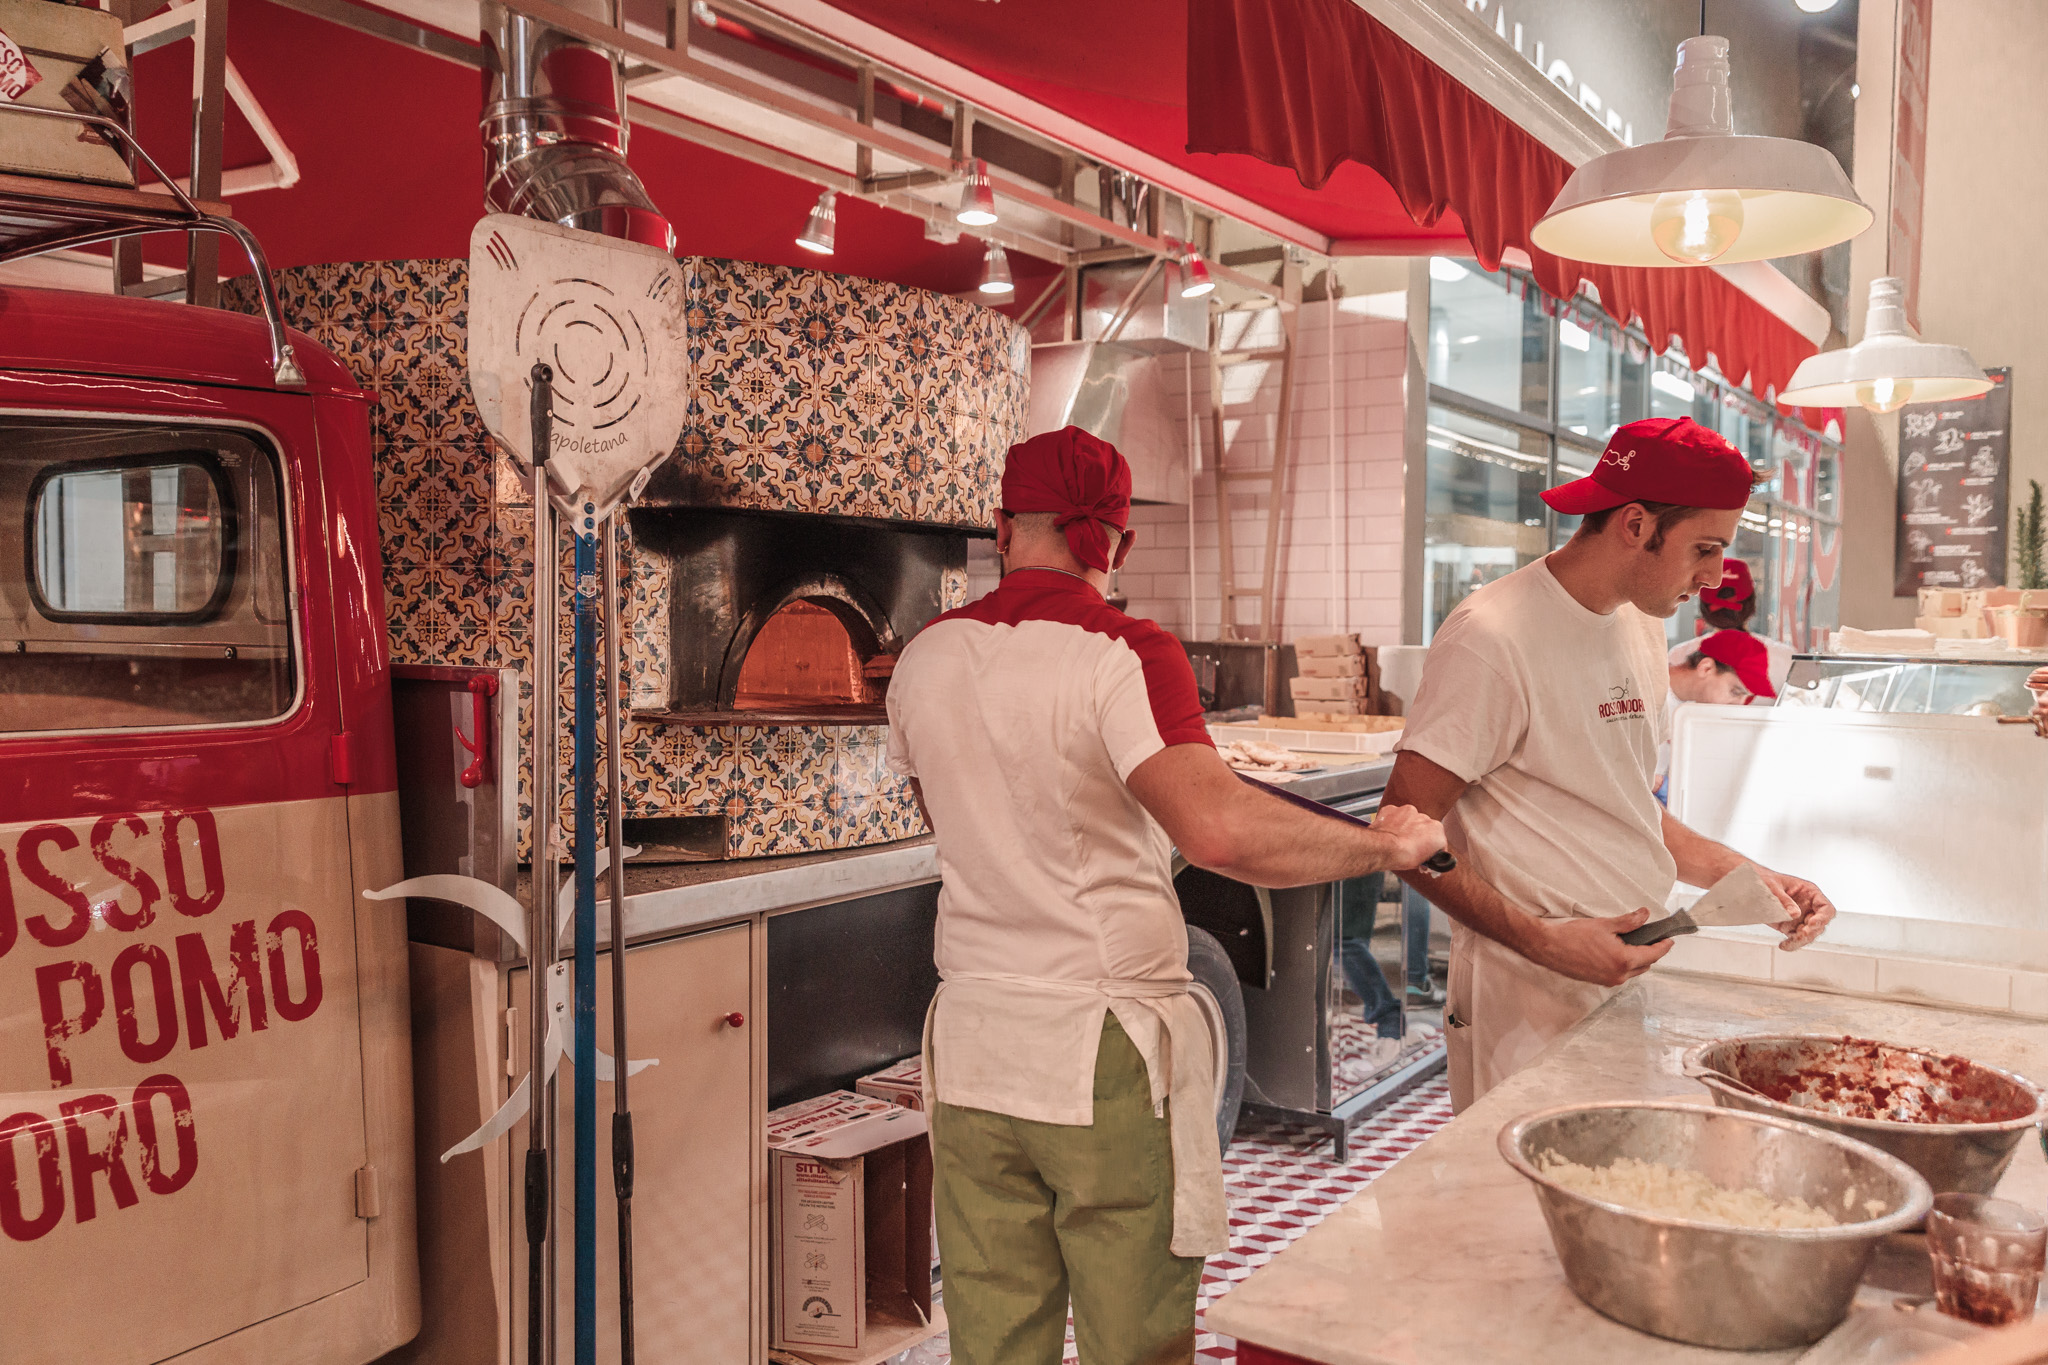 The Quick Guide to Visiting FICO Eataly World in Bologna, Italy // #readysetjetset #ficoeatalyworld #bologna #italy #food #italianfood www.readysetjetset.net